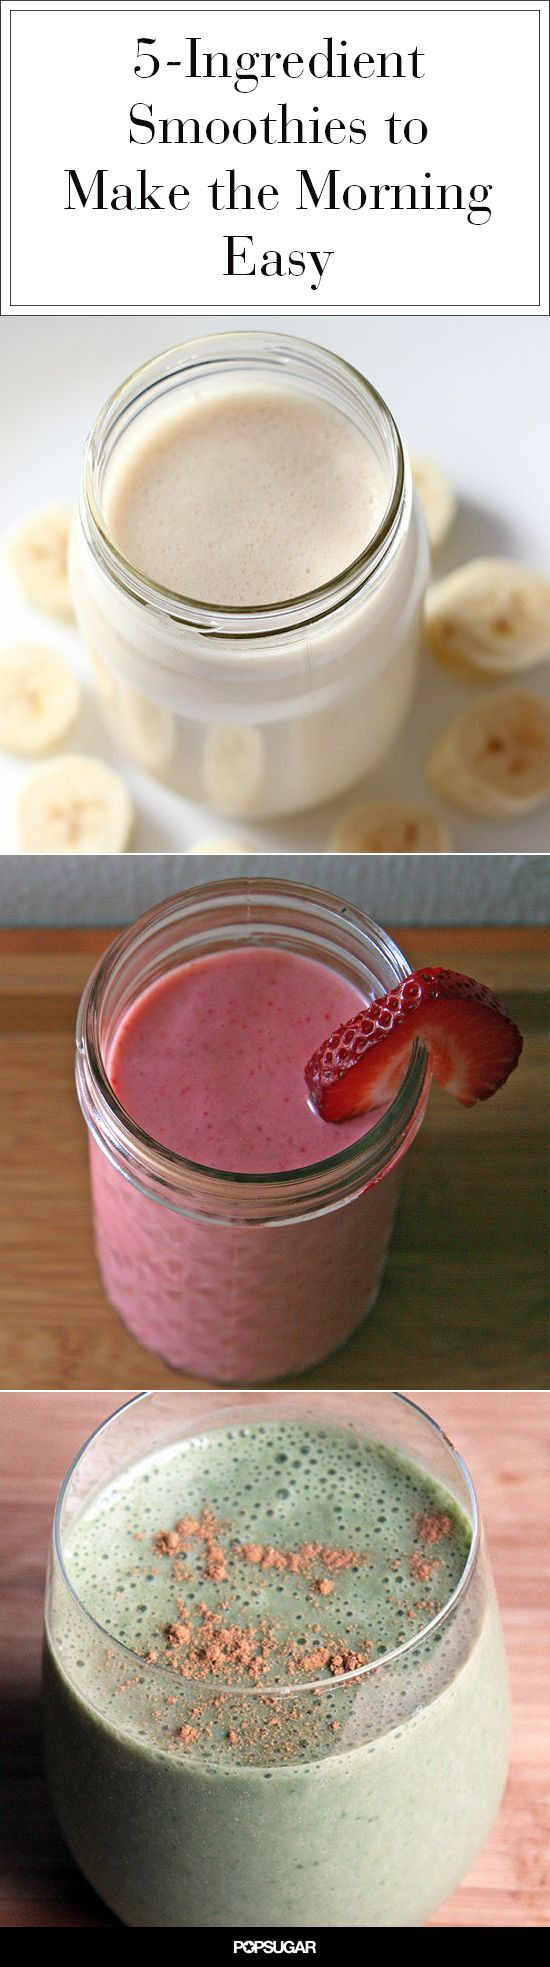 Easy Healthy Smoothies
 Simple smoothie recipes